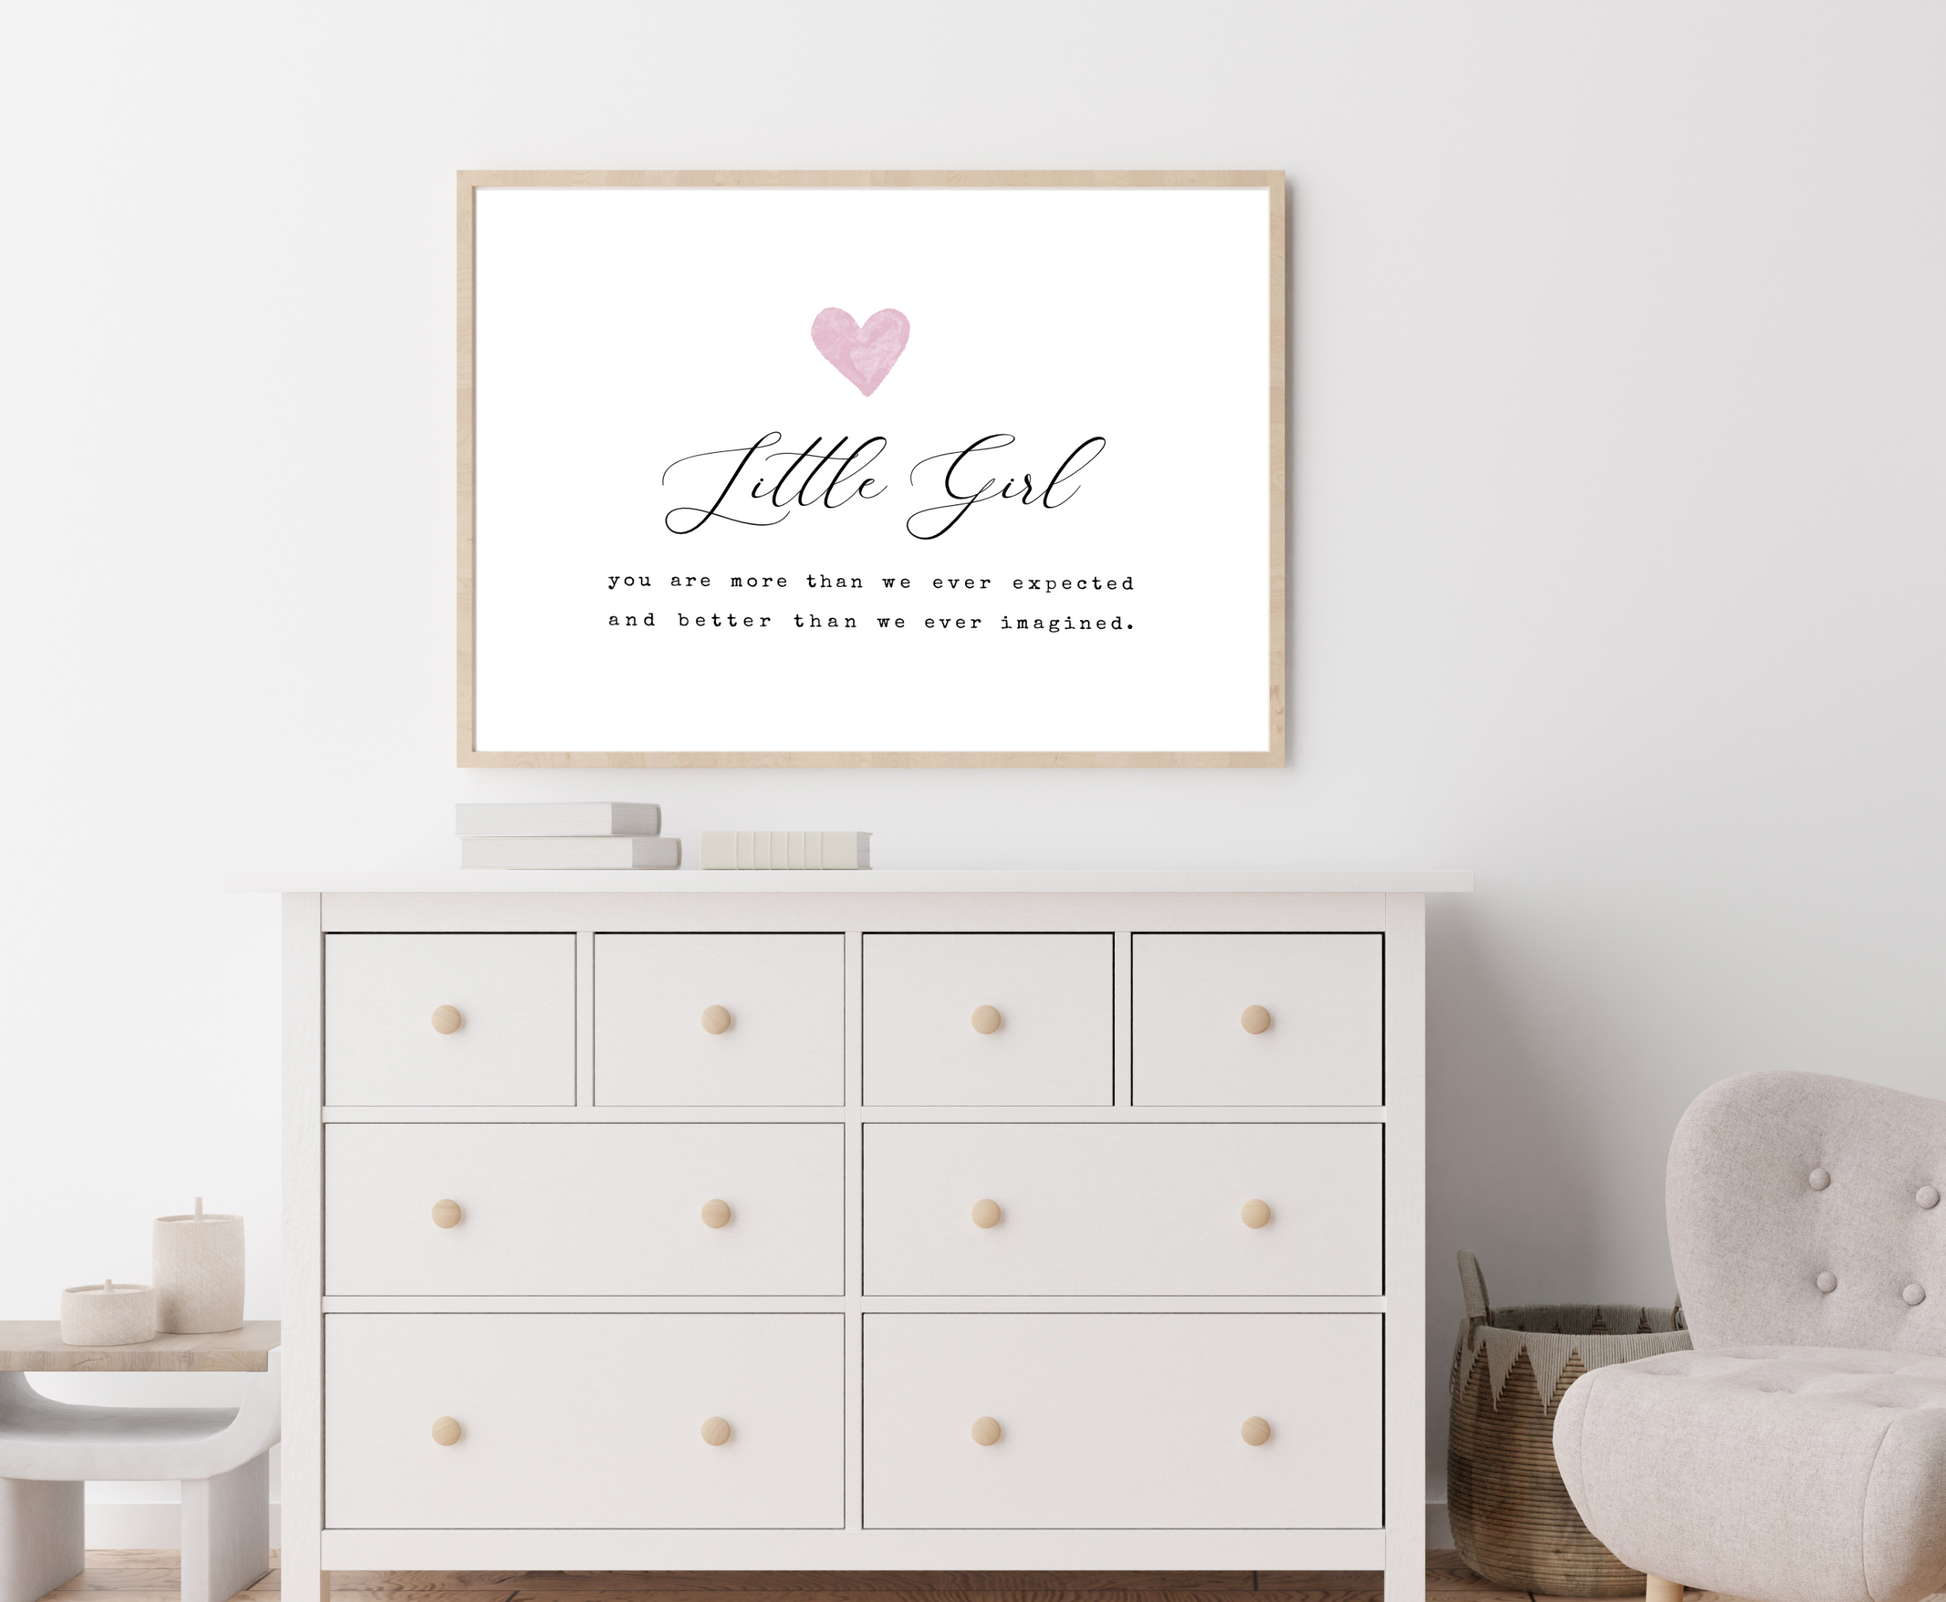 A digital print is placed above a nursery wardrobe. The digital print has a pink heart at the top and a piece of writing that says: “Little girl, you are more than we ever expected and better than we ever imagined.”